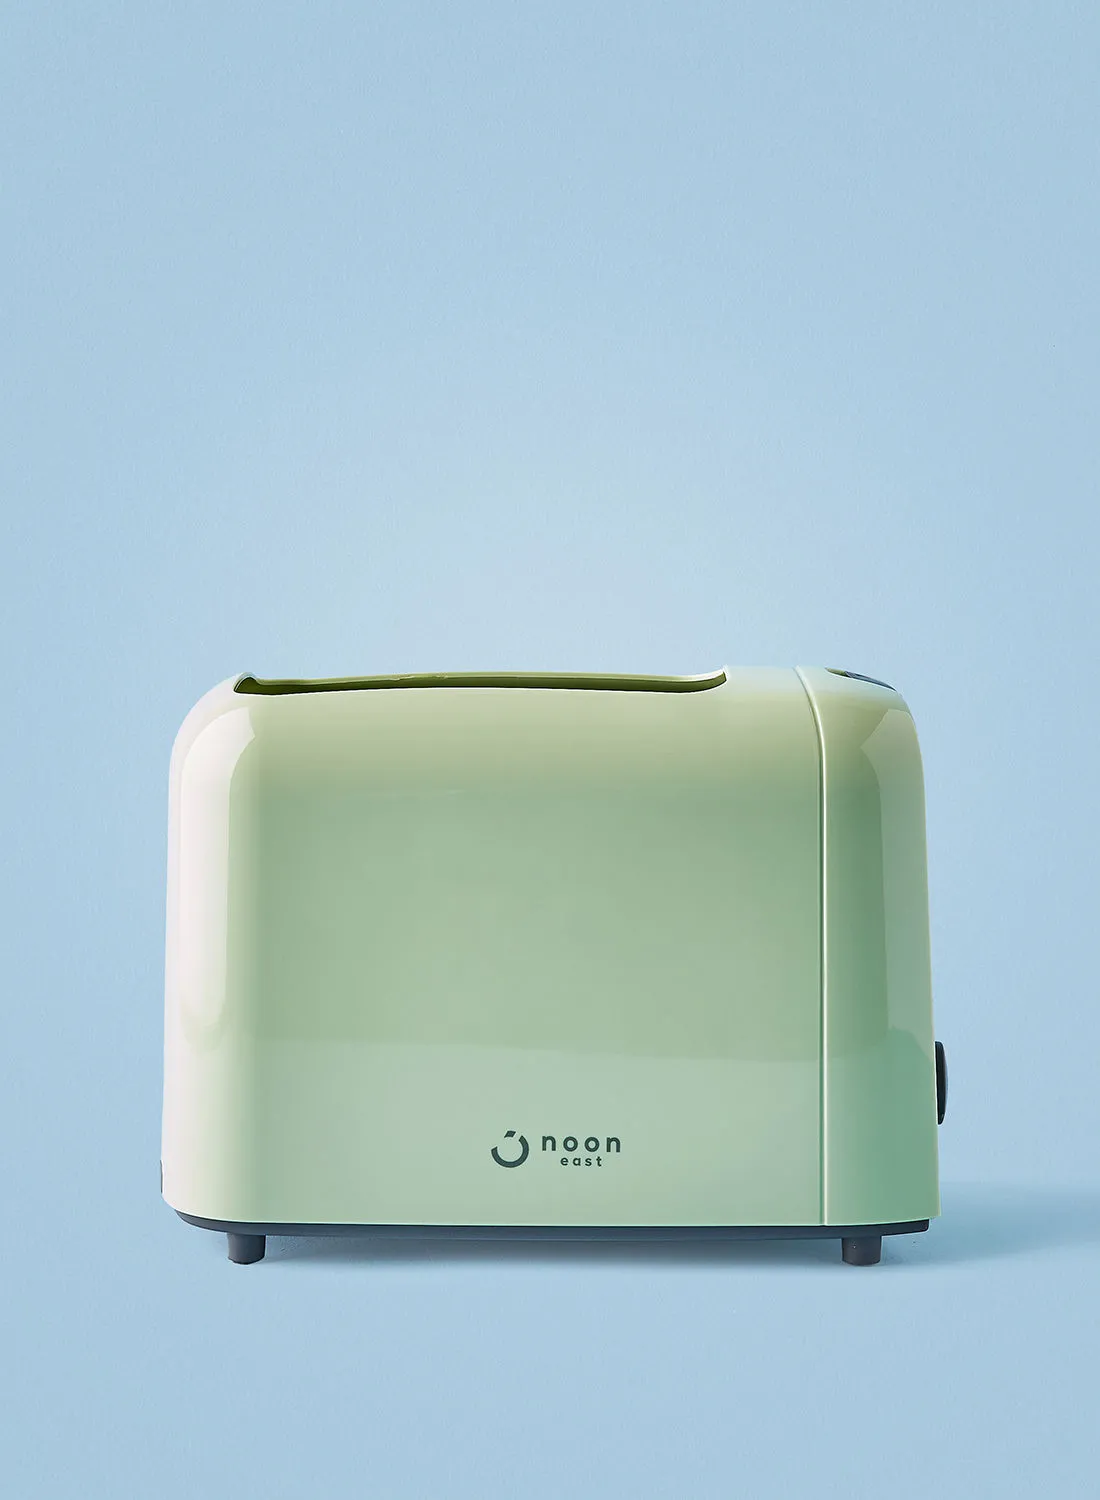 noon east Bread Toaster - For 2 Slice- 700 W With Defrost Function- Light Green